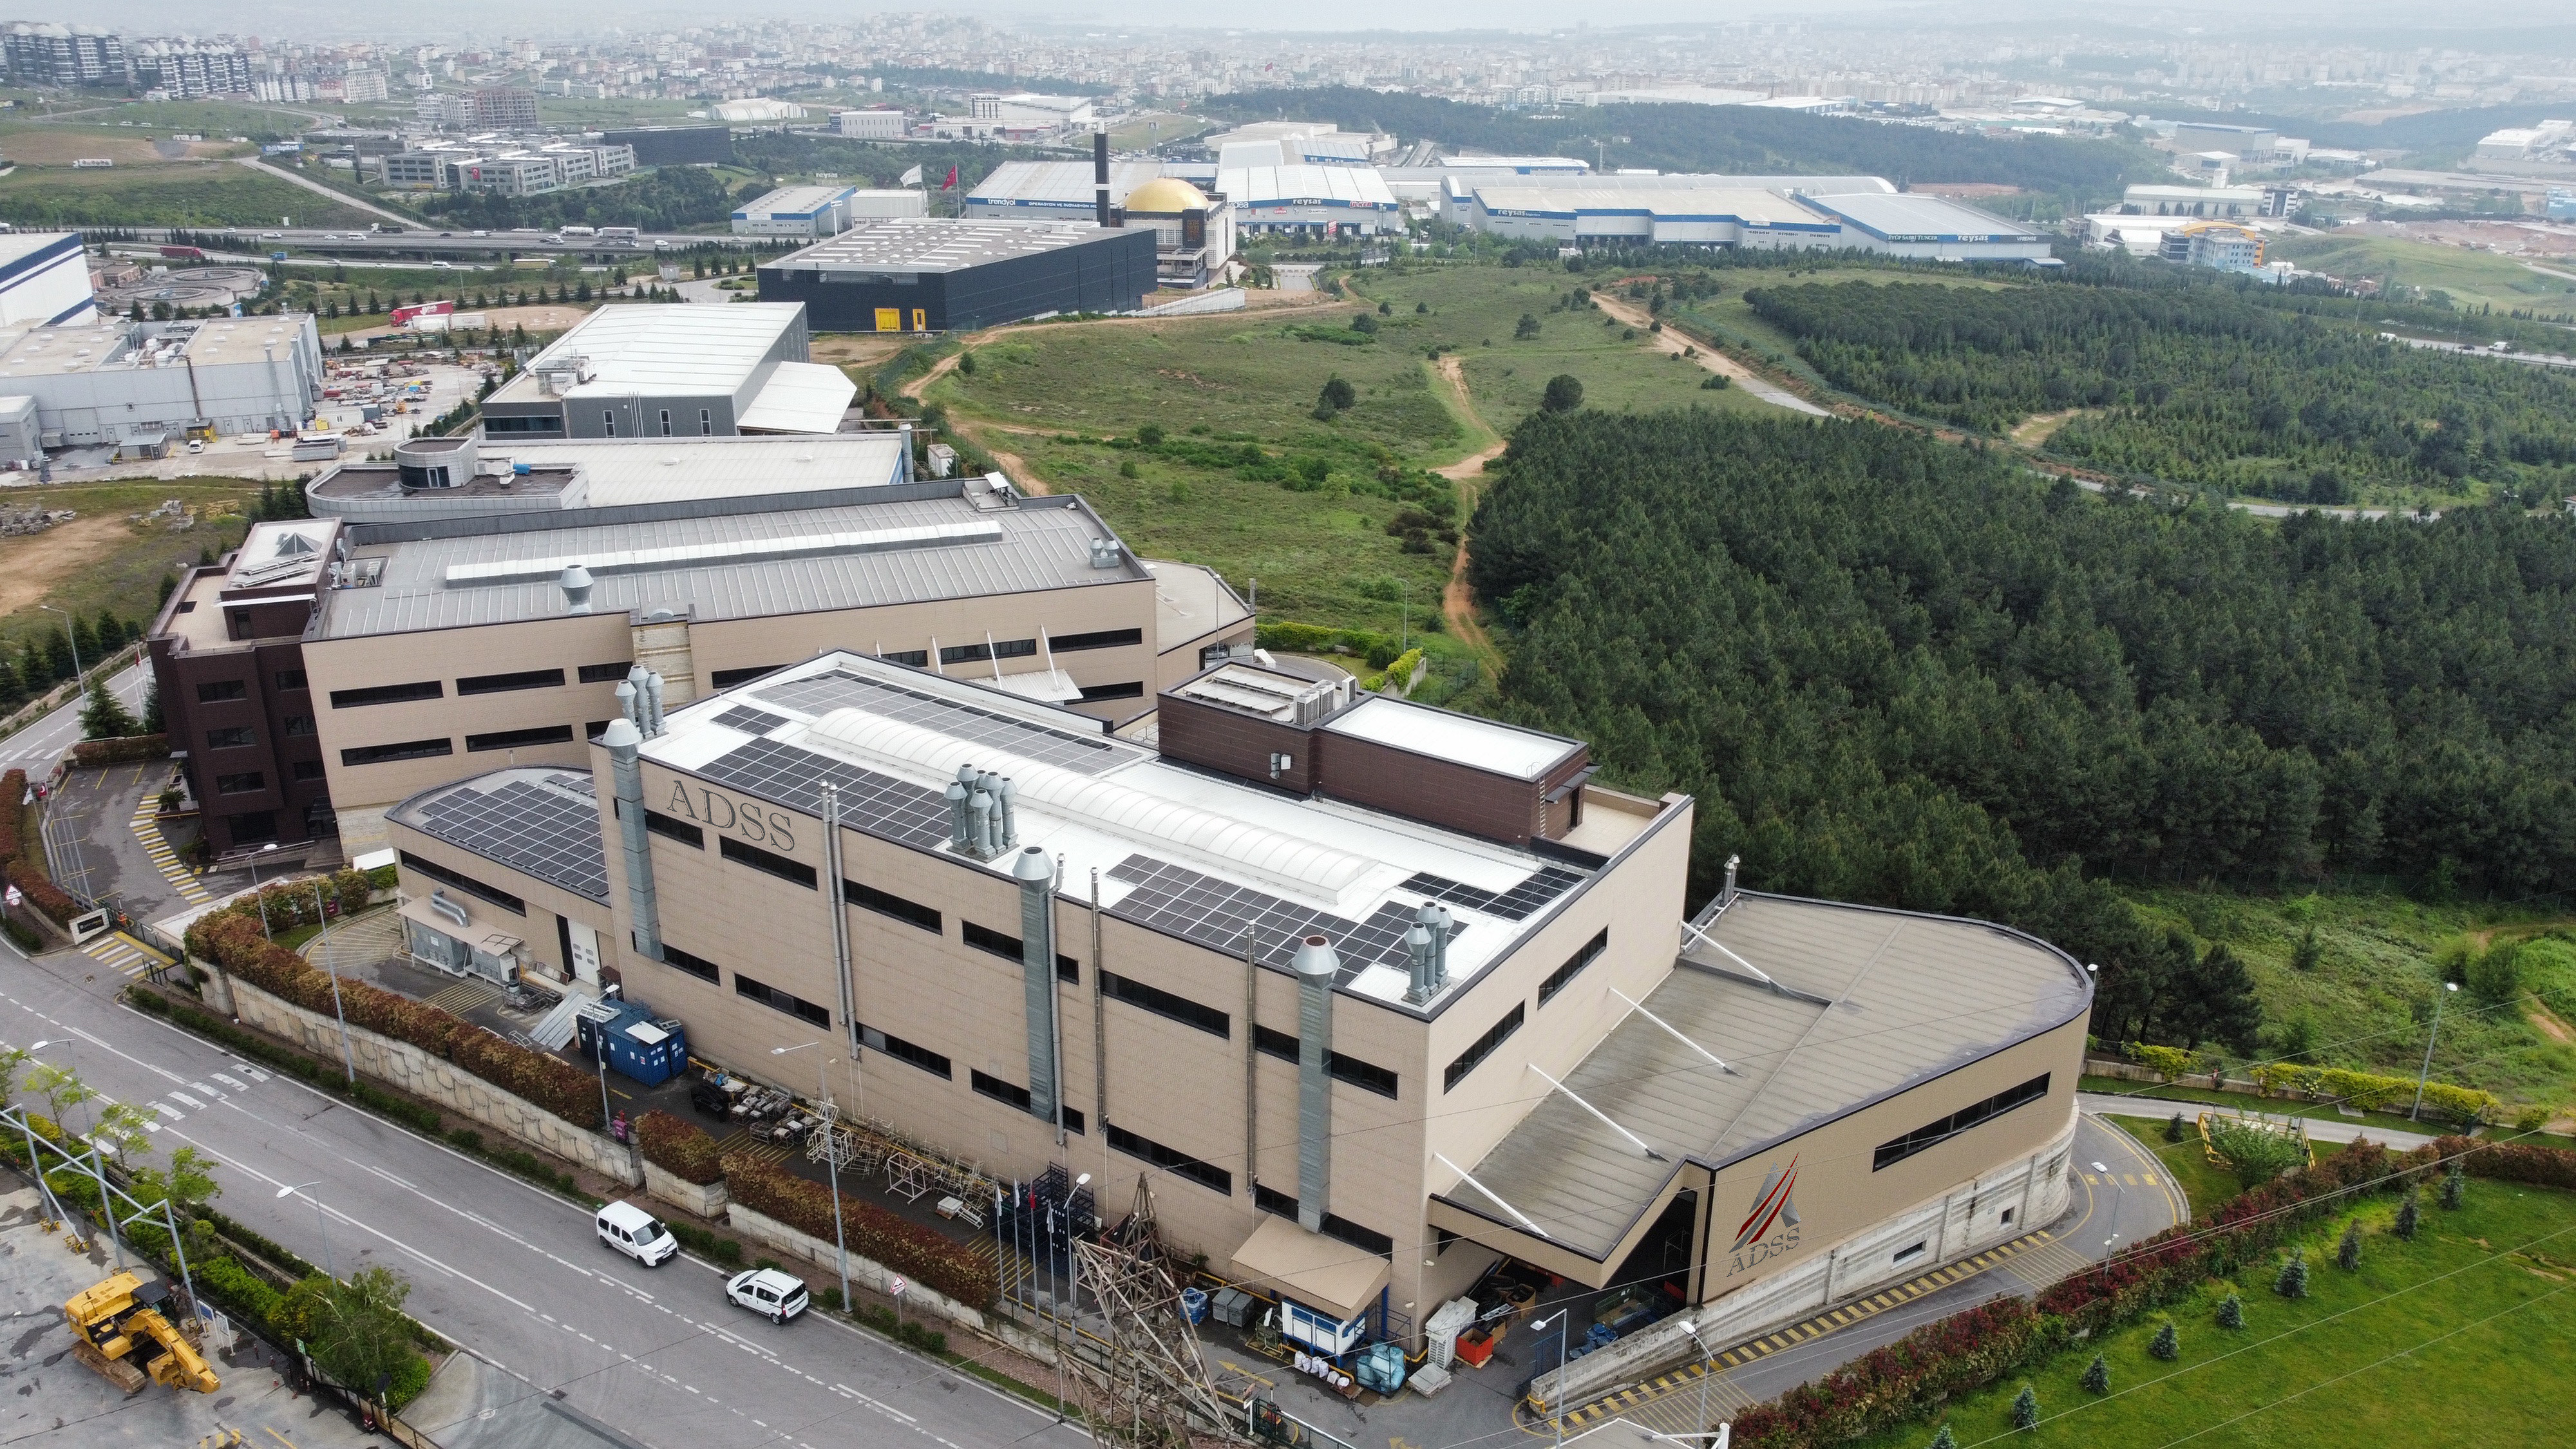 Picture of the ADSS Factory